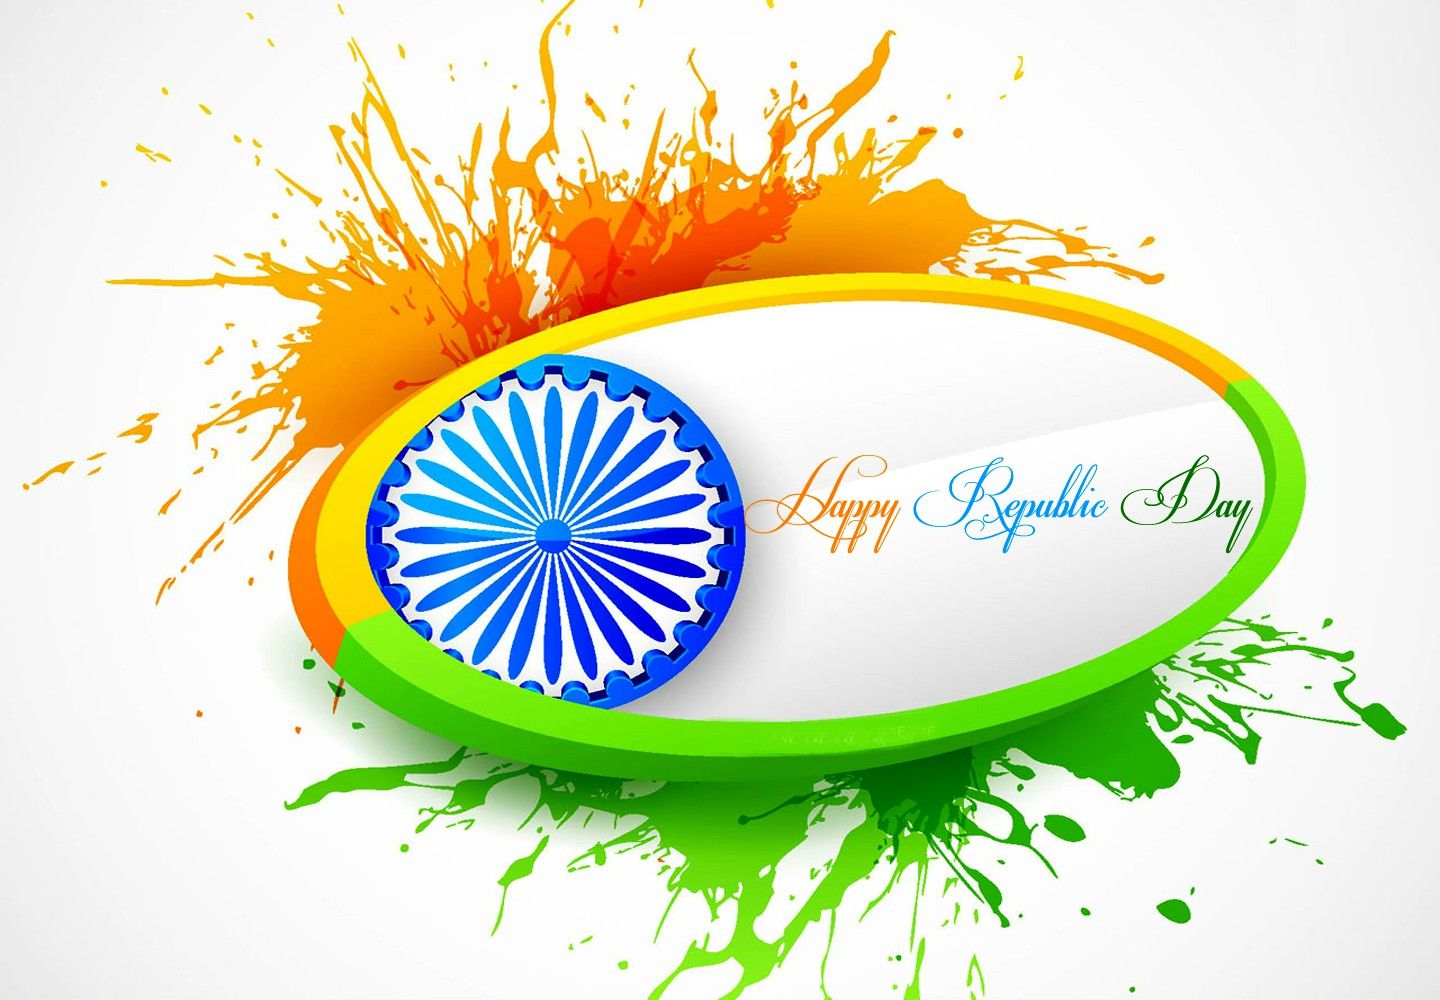 India Republic Day 2021: 29 Image, Wishes, Essay for Students